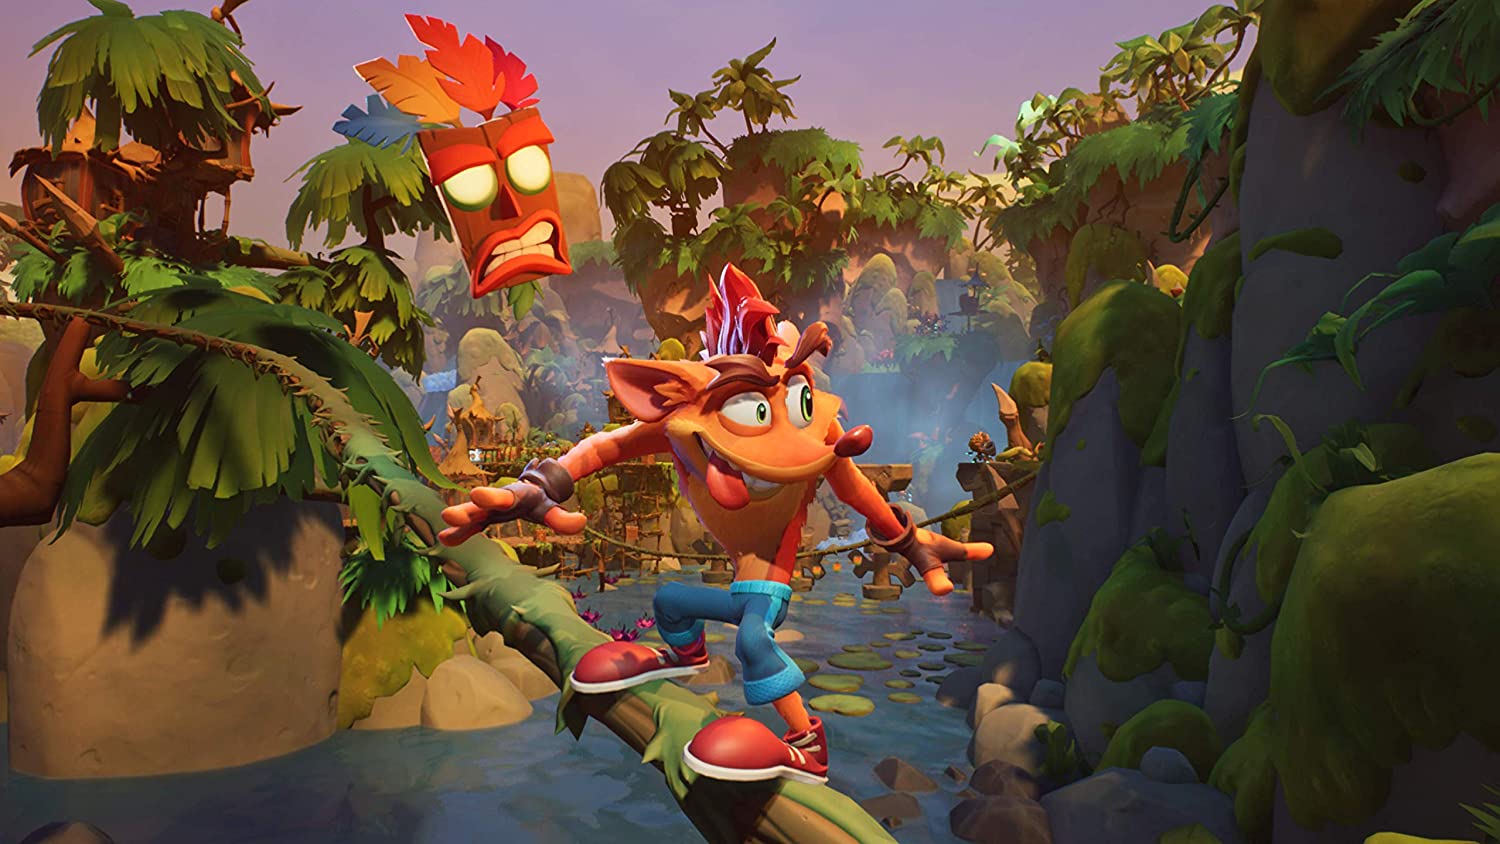 Crash Bandicoot 4's BARGAIN Guide: Here's Where to Buy It At a Cheaper Price! 